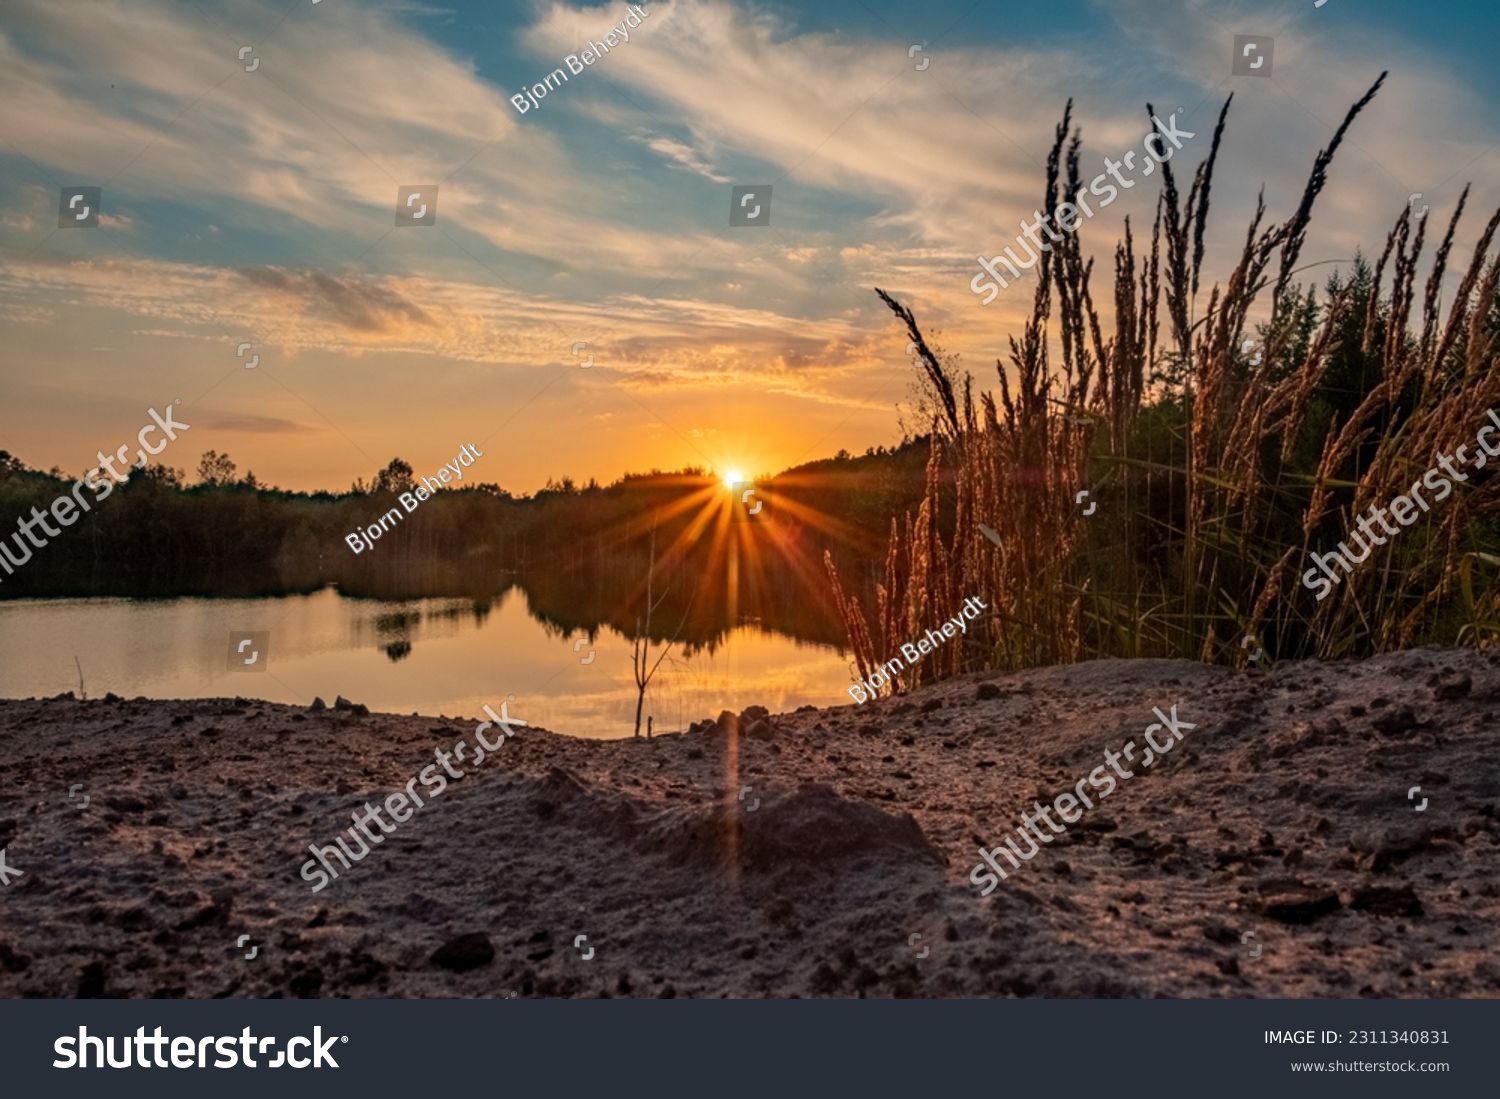 Dramatic and colorful sky at sunset or sunrise over the lake through the forest trees behind a foreground of high grass on a sandy wwaterside. High quality photo #2311340831